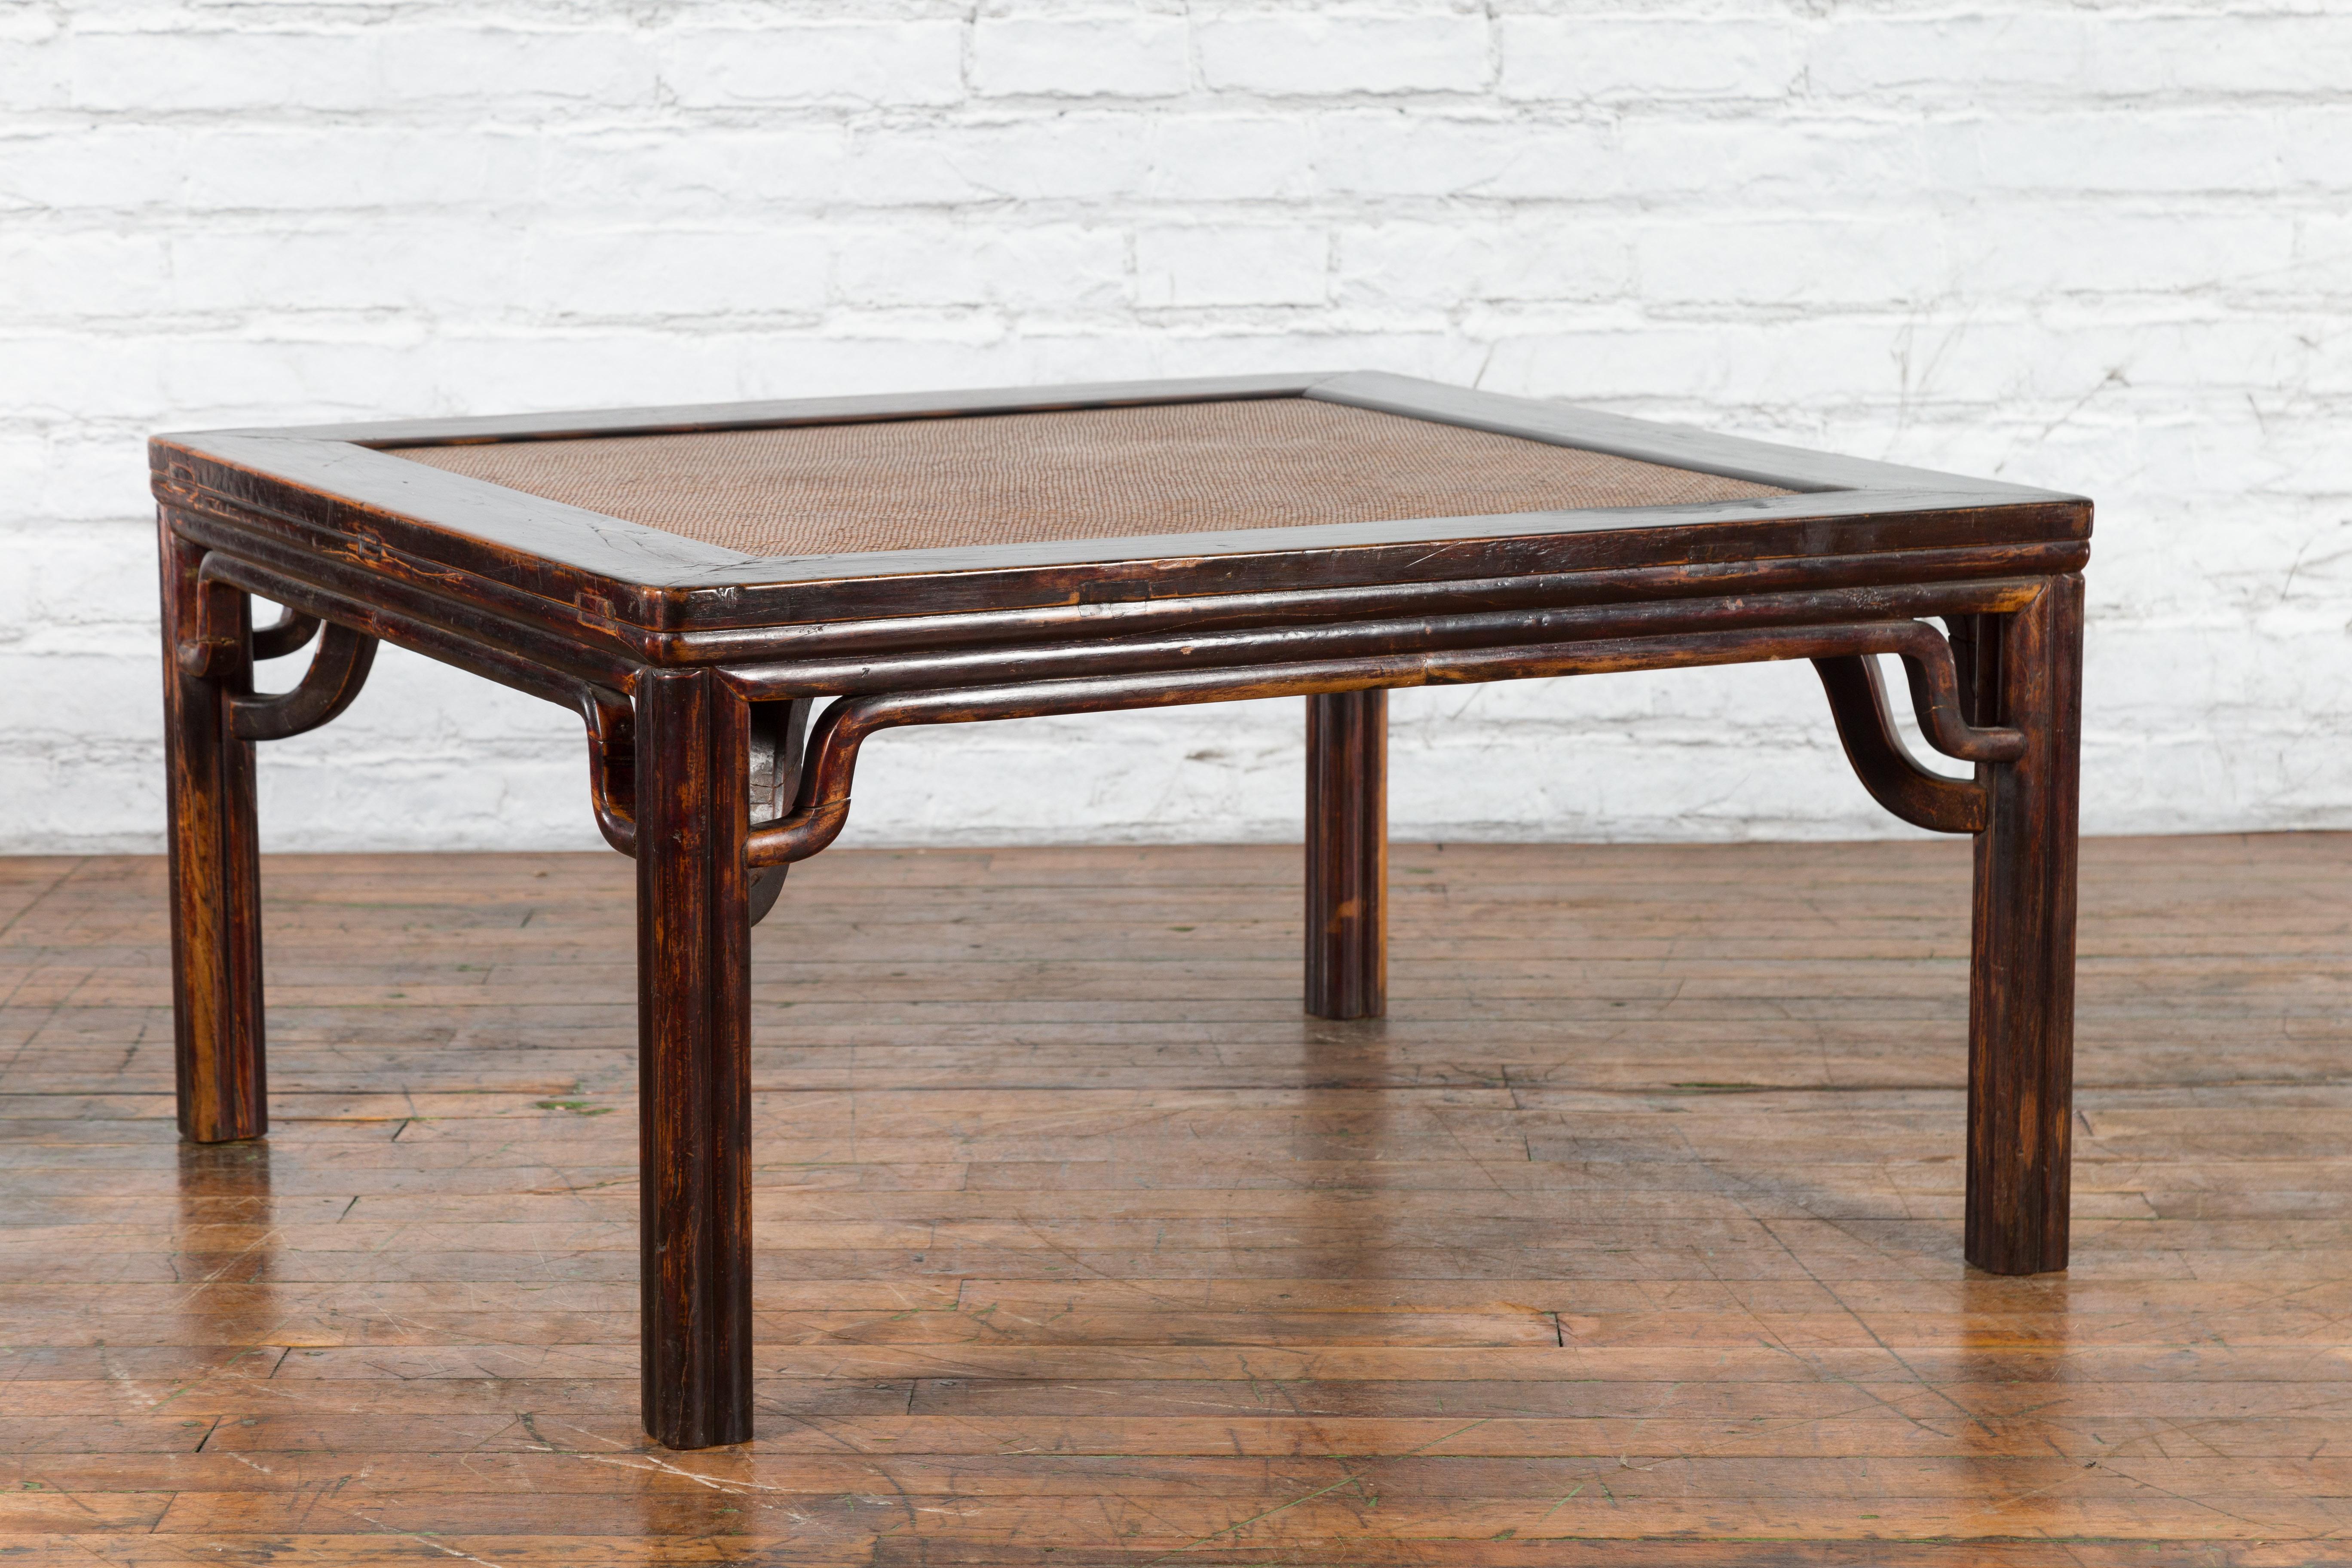 19th Century Chinese Ming Dynasty Style Wooden Coffee Table with Hand-Woven Rattan Top For Sale